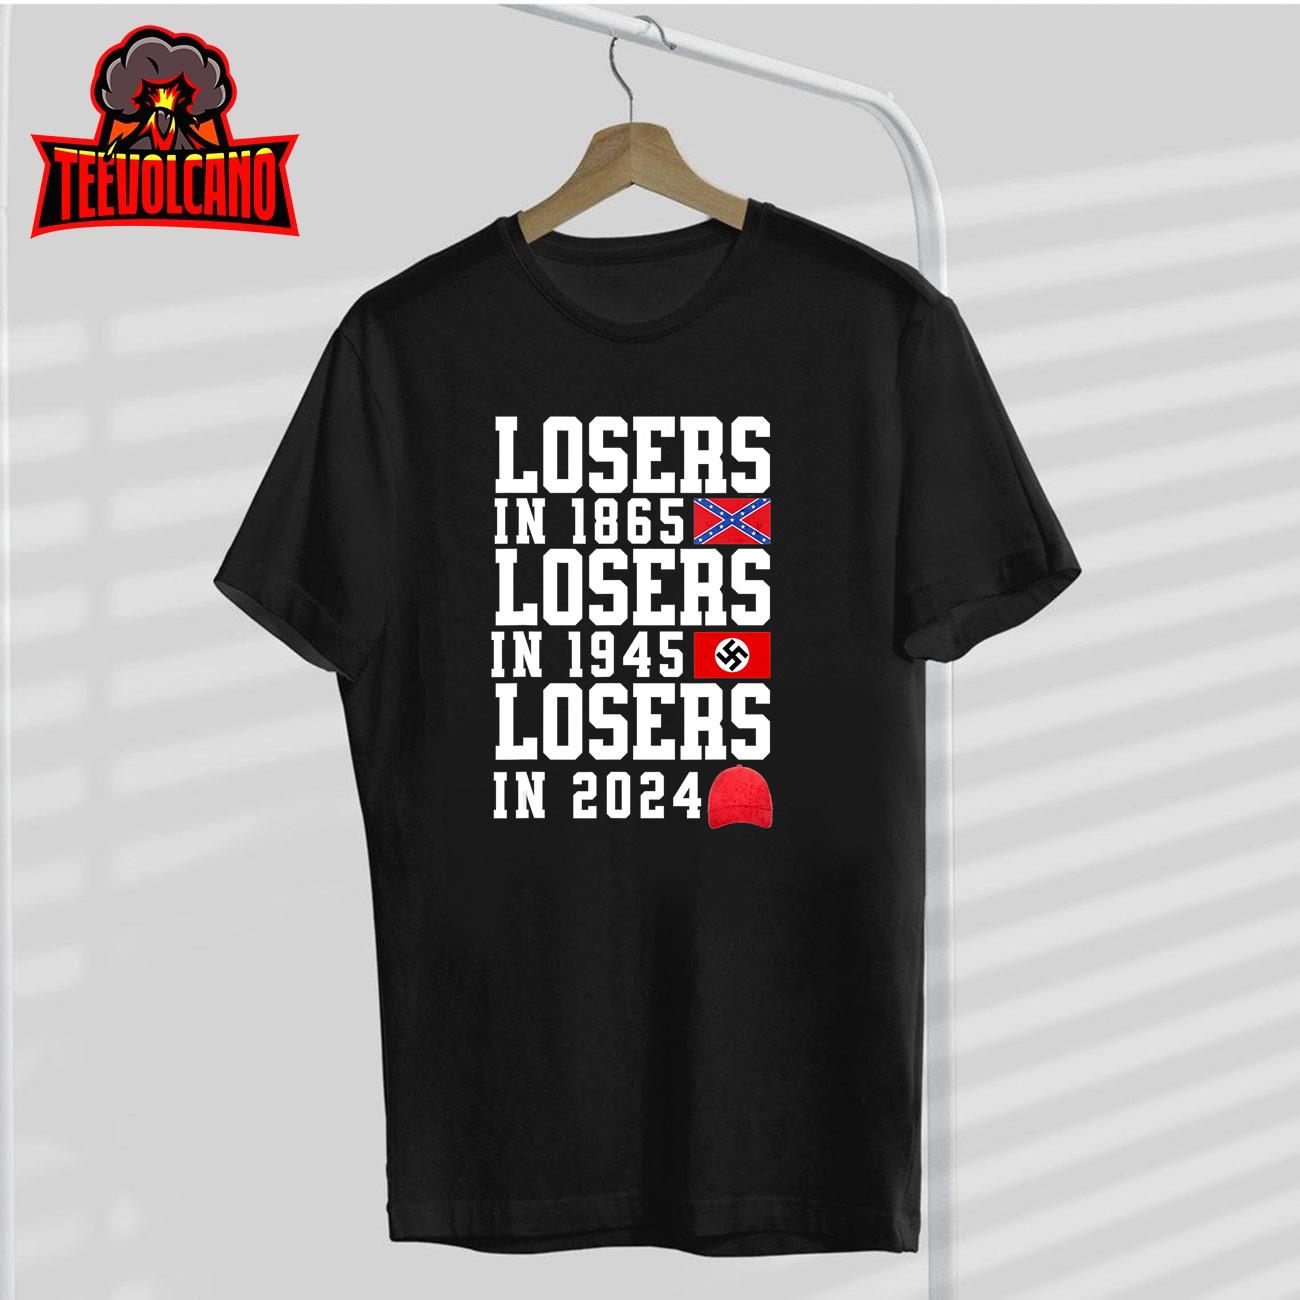 Losers in 1865 Losers in 1945 Losers in 2024 T-Shirt